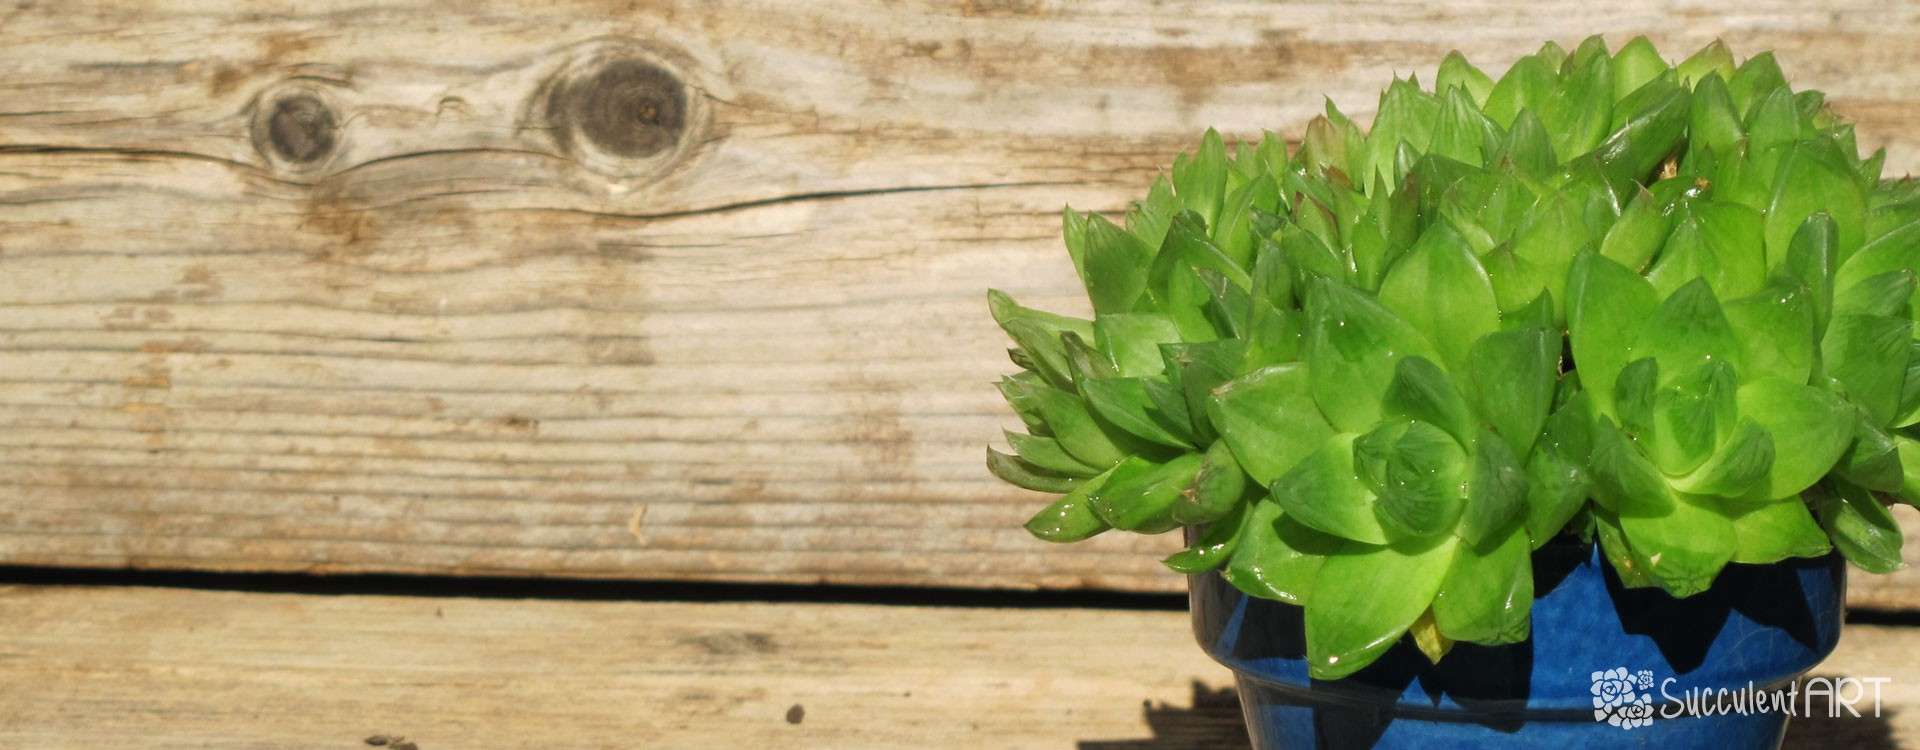 How to Plant Succulents into Pots & Containers